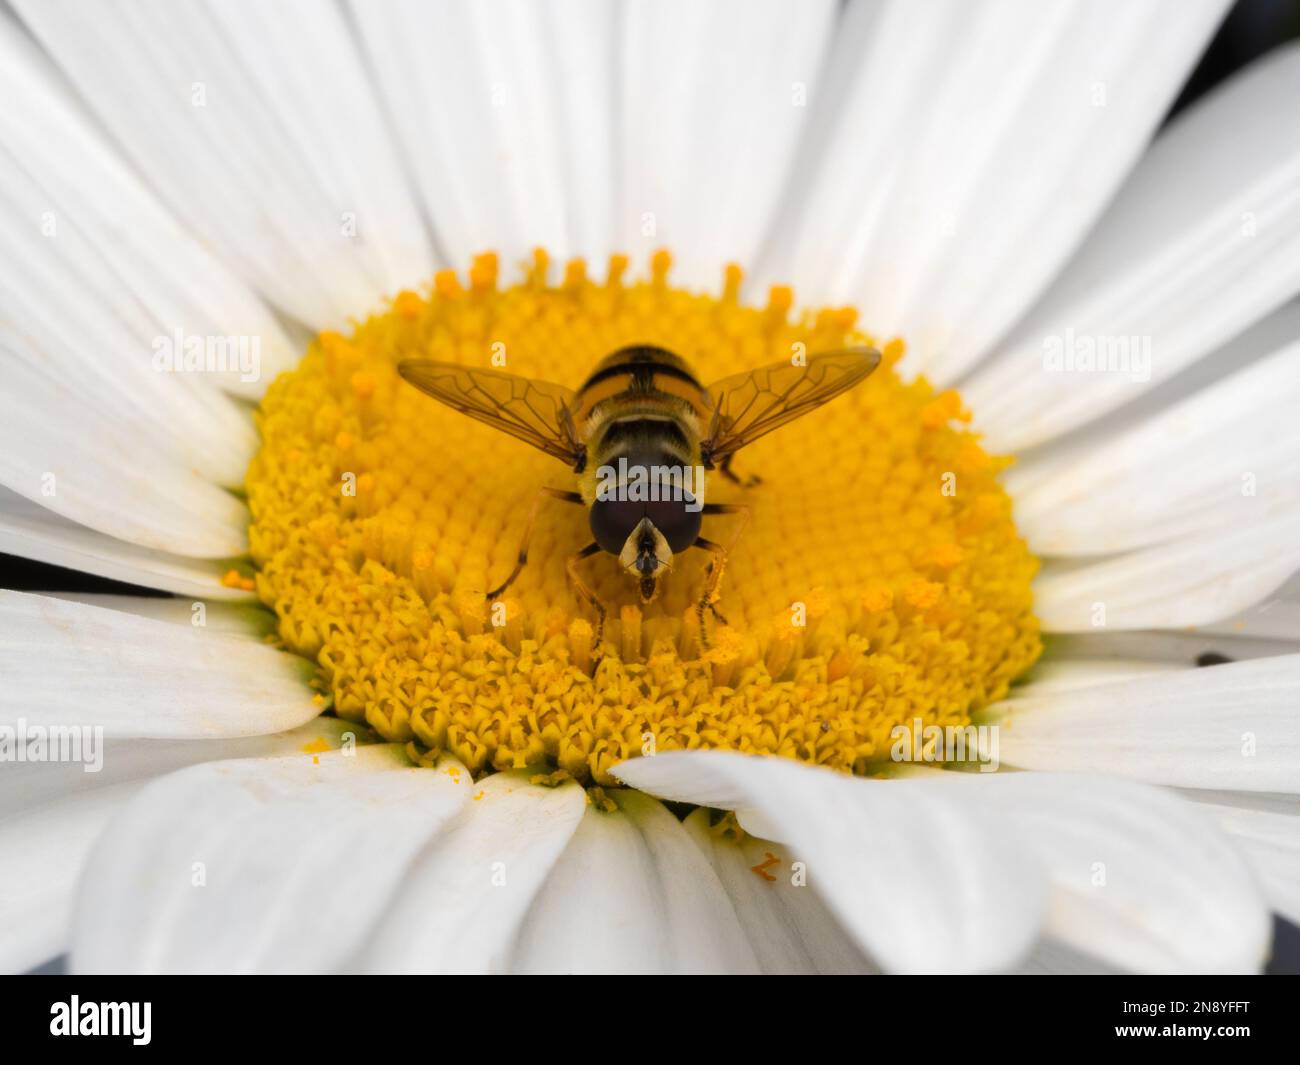 Front view of a common drone fly (Eristalis tenax) centered on a white and yellow daisy flower as it feeds on pollen Stock Photo